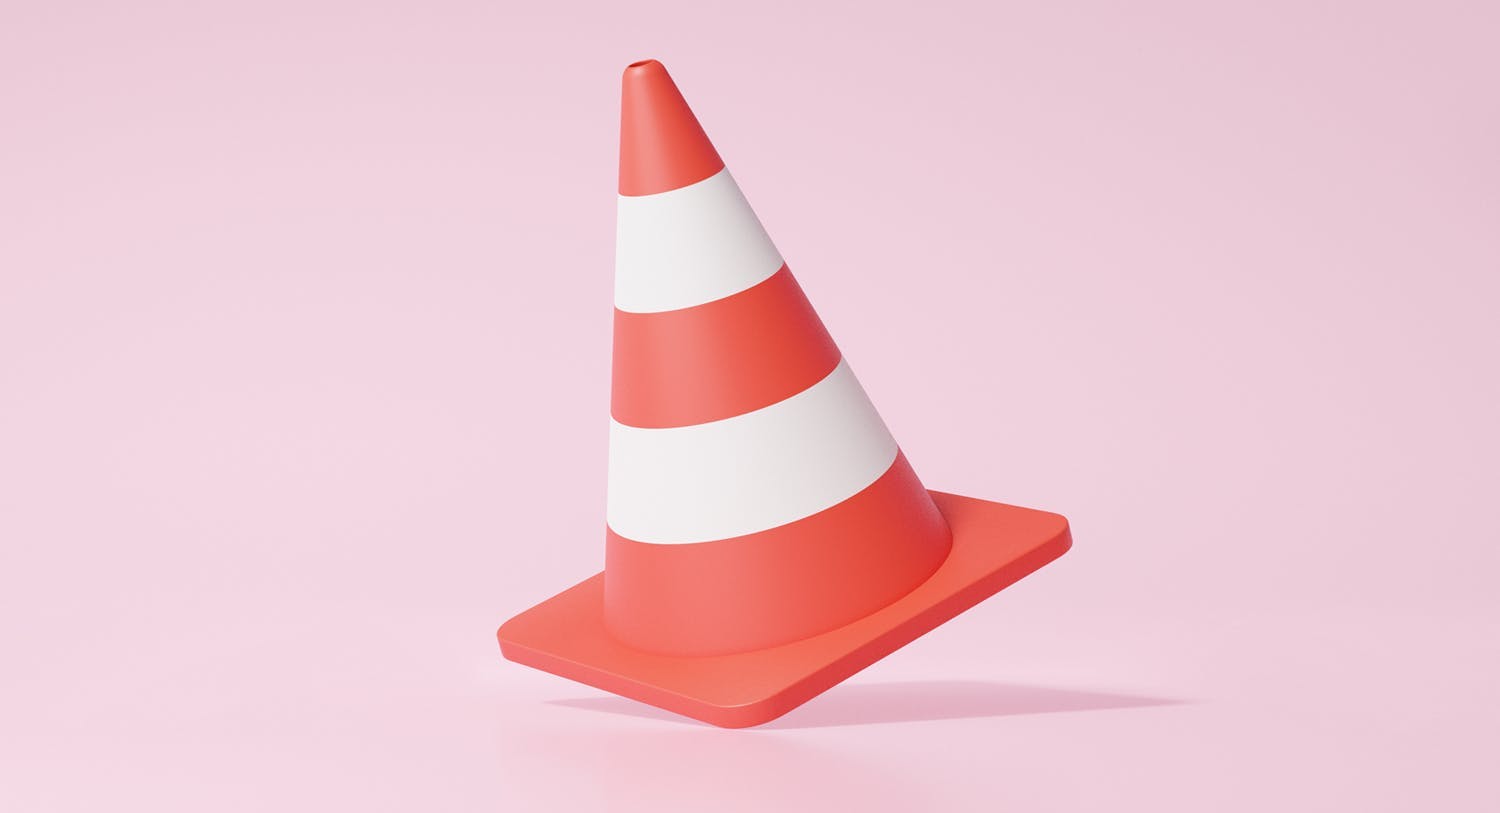 An illustration of a red traffic cone that has two white stripes on it. A traffic cone, like this, often acts as a warning signal, which it is being used as the header image for a blog on Barriers to Effective Communication & How to Overcome Them.